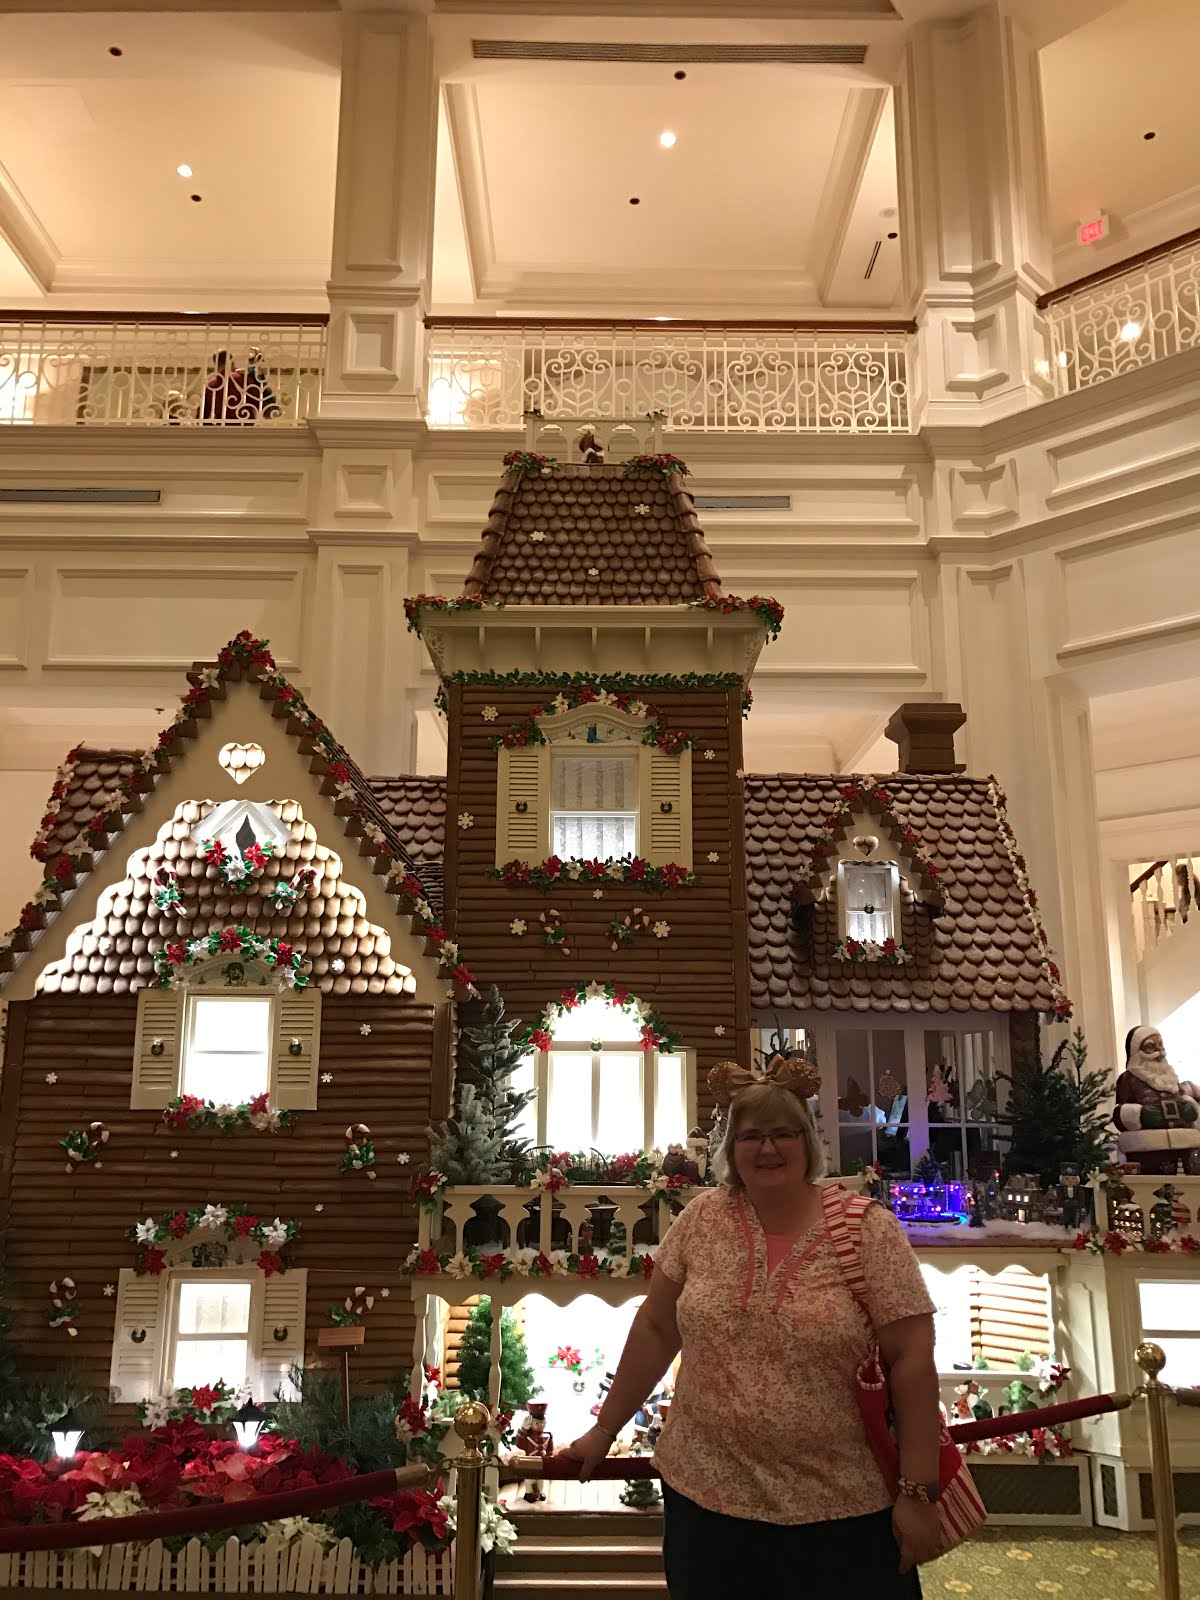 Gingerbread house at Disney